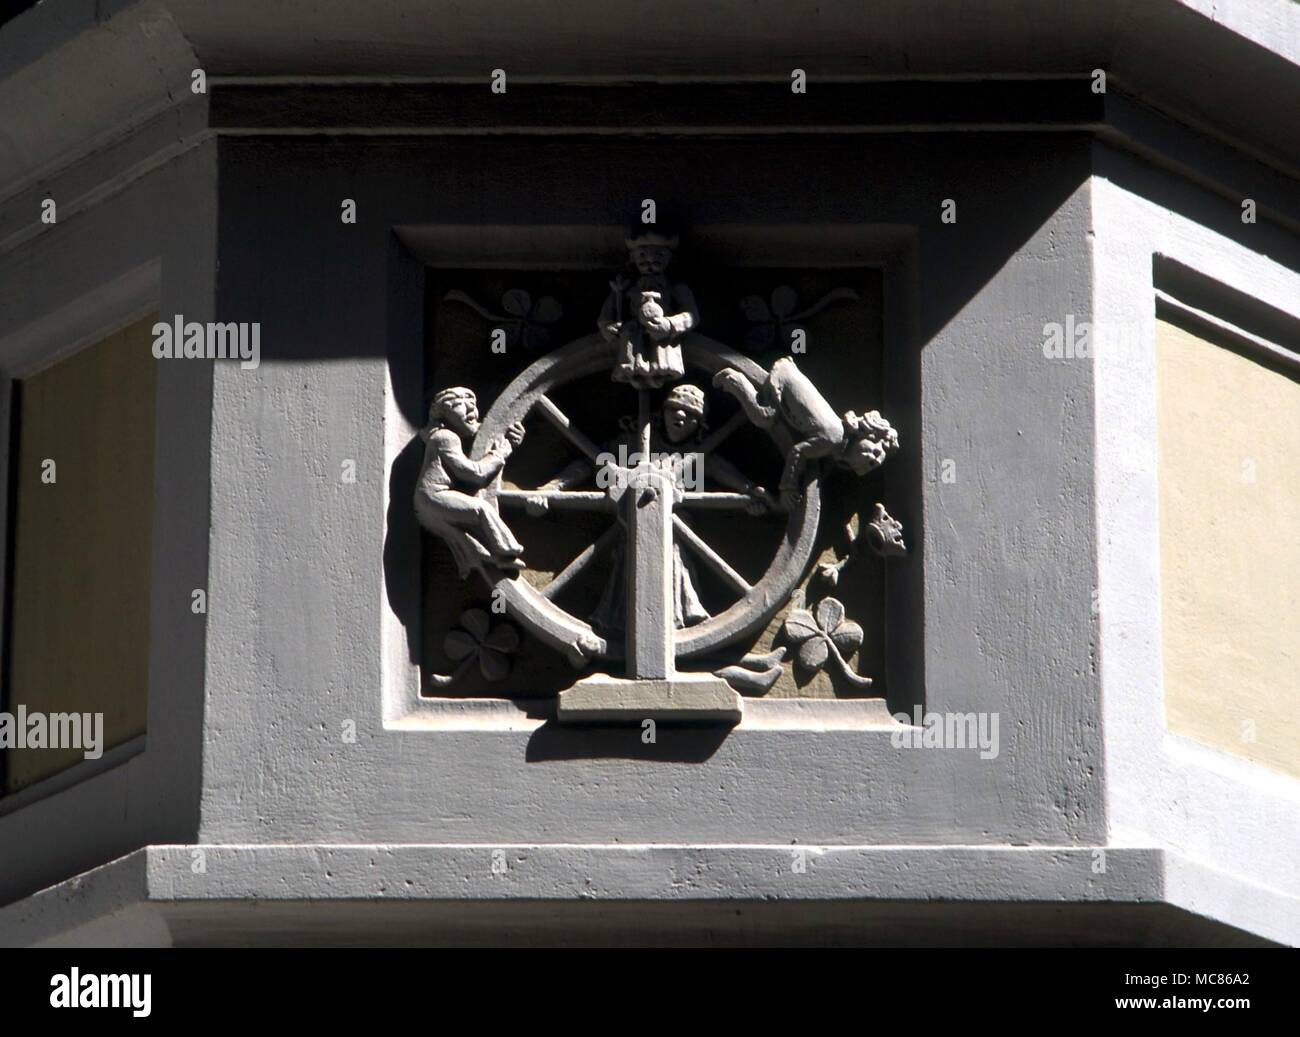 Wheel of Fortune, with one rising, one falling, and Fortune herself blindfold. Image on facade of a house in the Swiss town of Shaffhausen Stock Photo